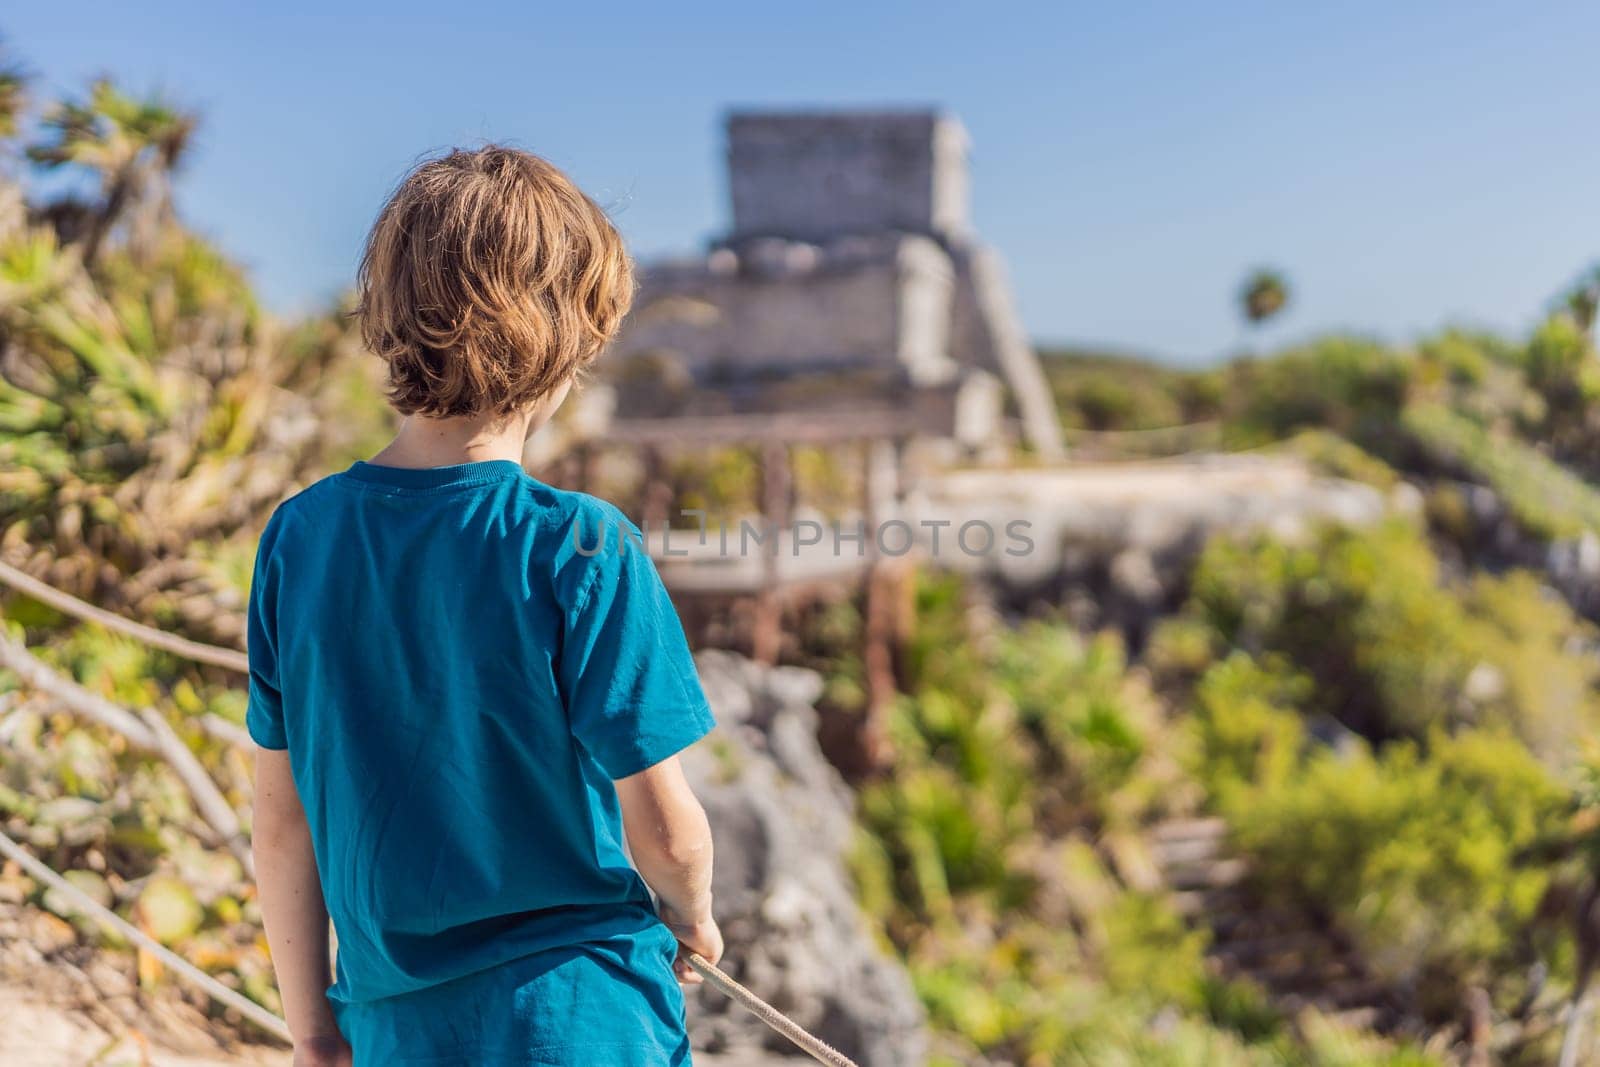 Boy tourist enjoying the view Pre-Columbian Mayan walled city of Tulum, Quintana Roo, Mexico, North America, Tulum, Mexico. El Castillo - castle the Mayan city of Tulum main temple.